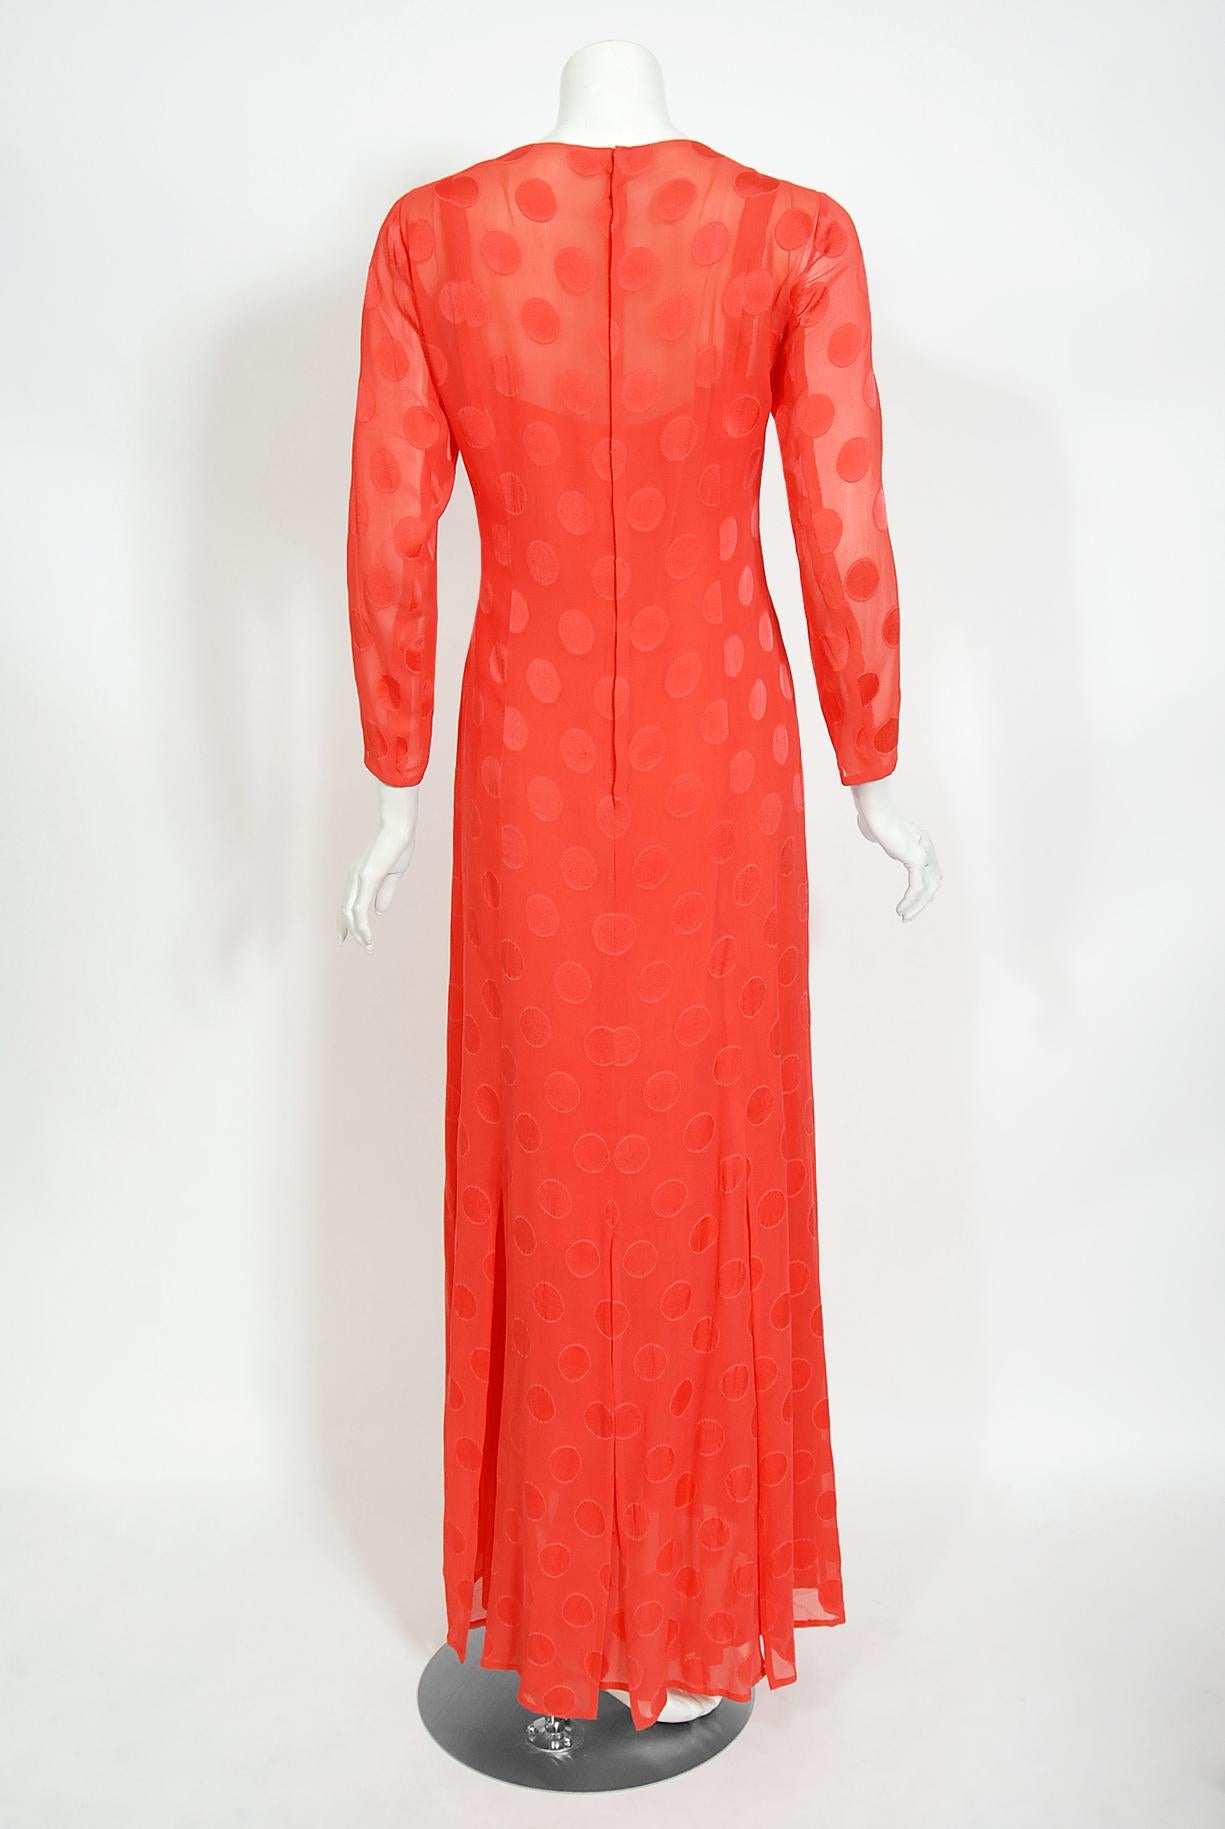 Vintage 1973 Givenchy Haute Couture Orange Dotted Silk Carwash-Hem Caftan Gown For Sale 9